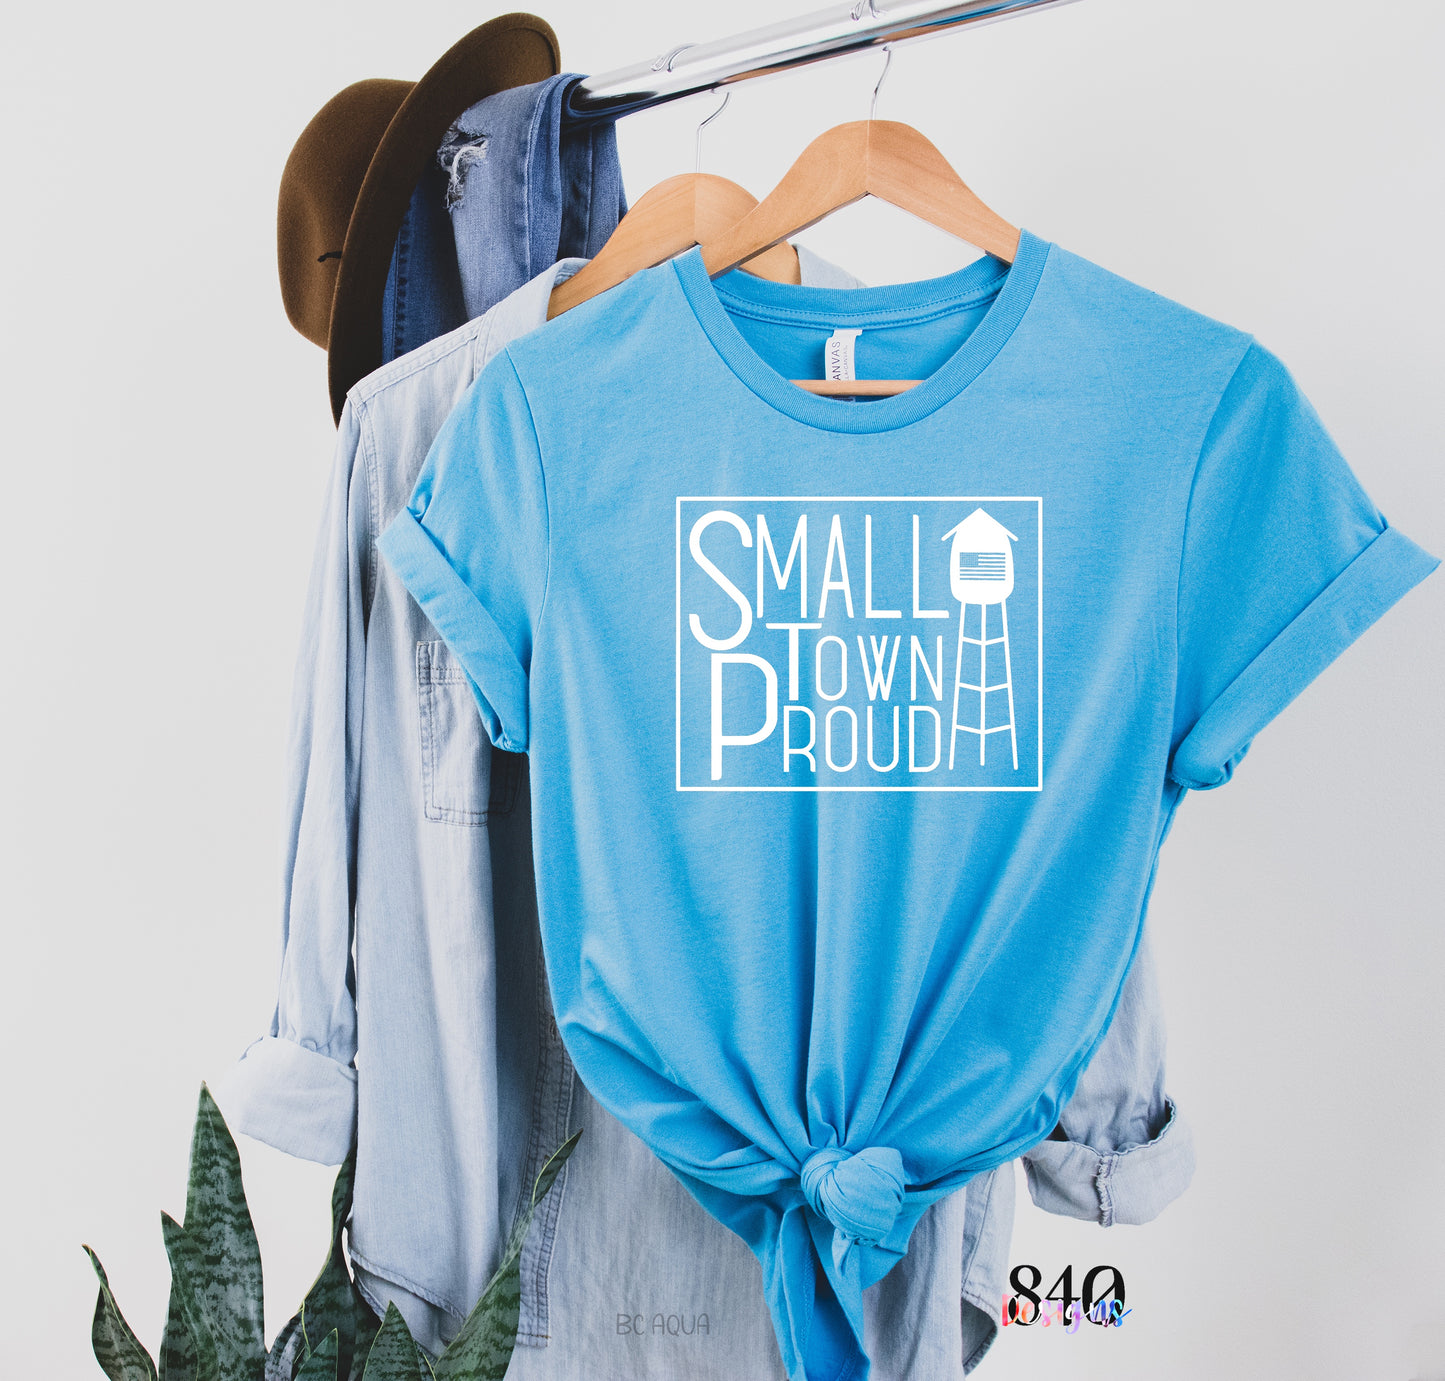 SMALL TOWN PROUD - 840 EXCLUSIVE